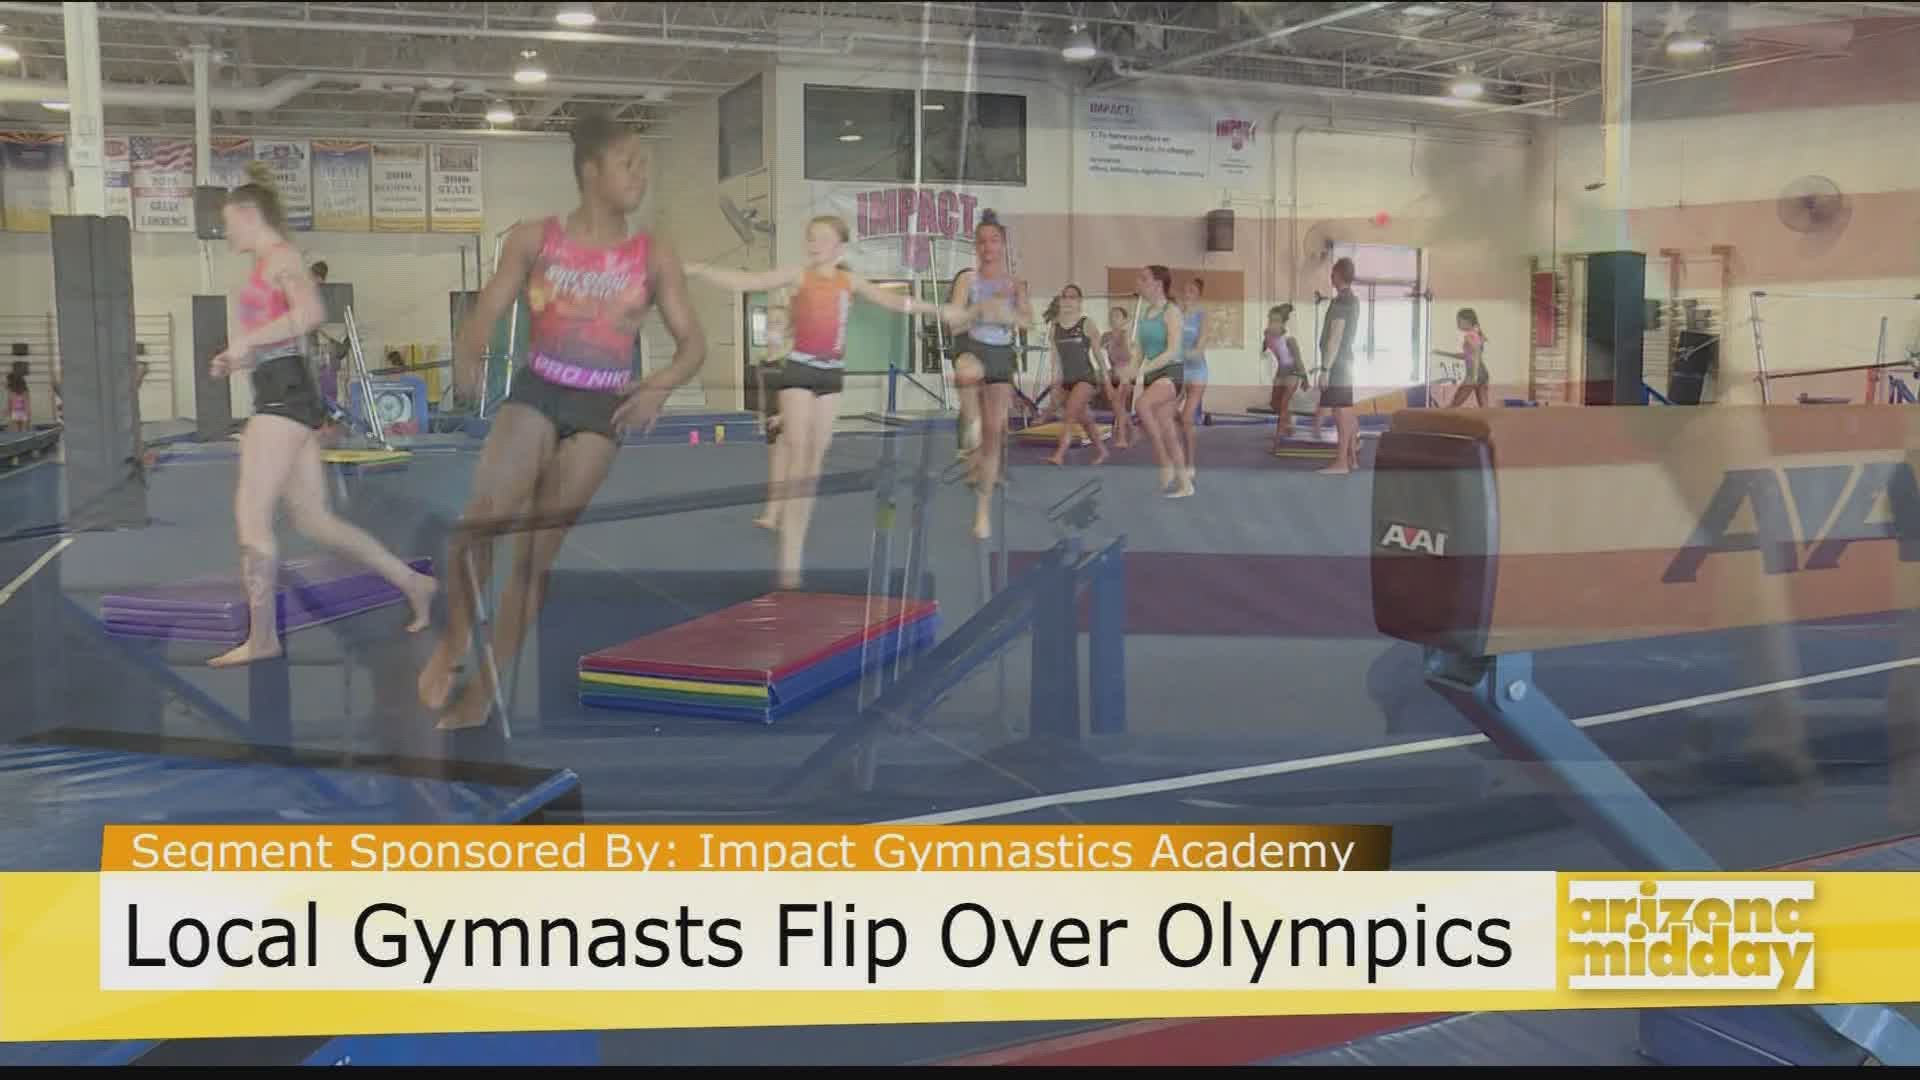 We talk with Impact Gymnastics Academy on their passion for the sport & what the 2021 Olympic Games means to them